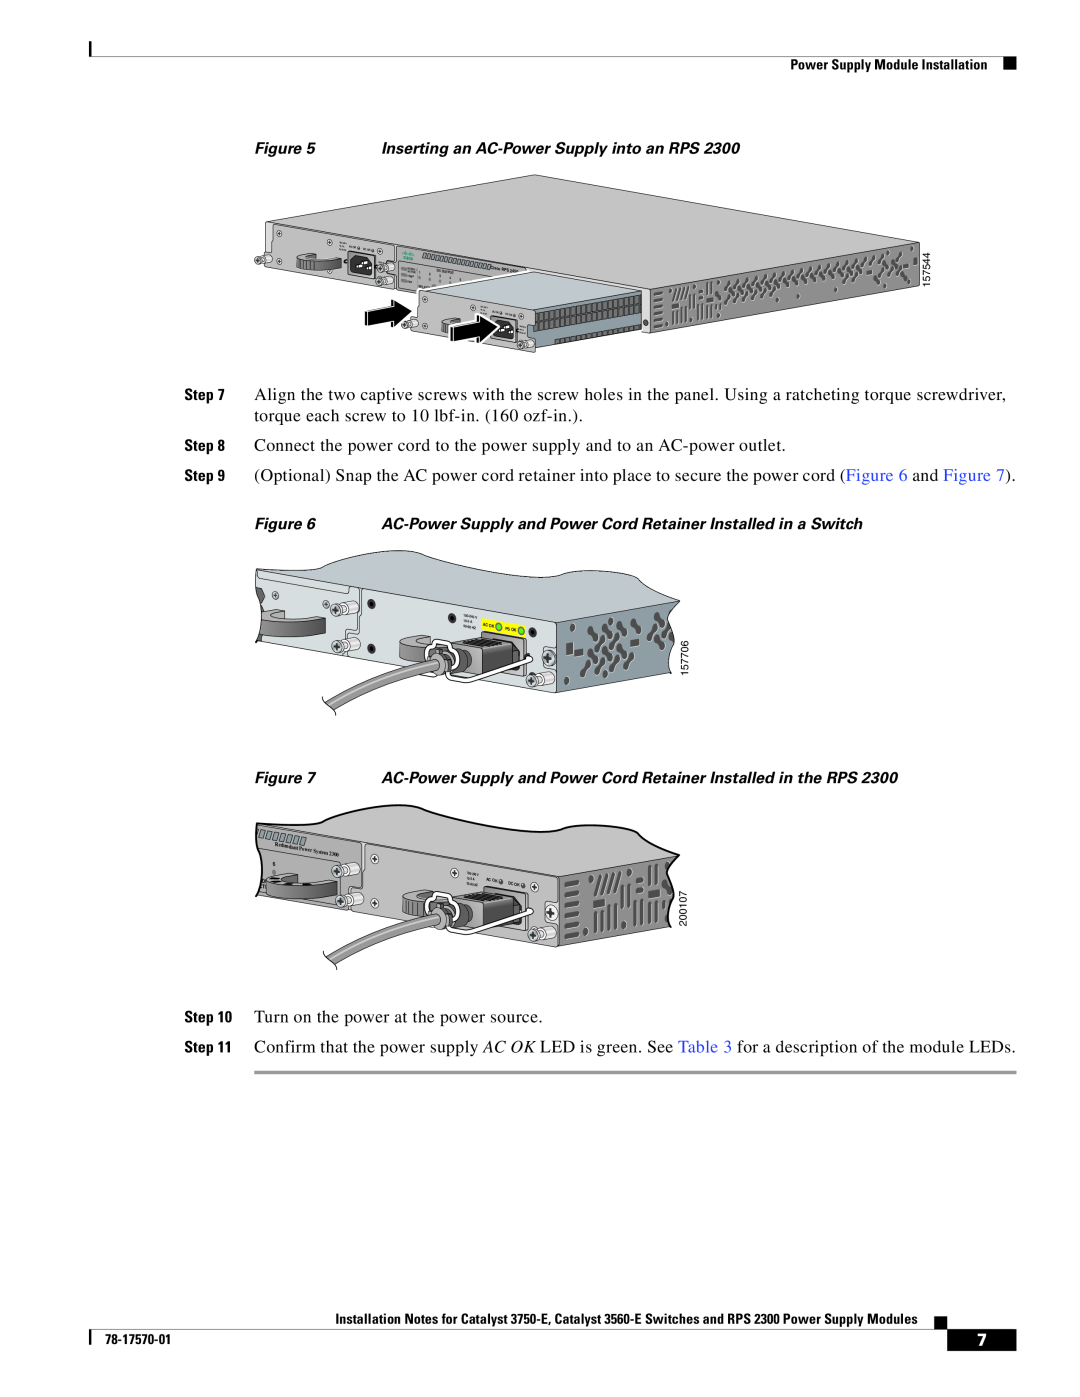 Cisco Systems 3560-E, RPS 2300, 3750-E technical specifications torque each screw to 10 lbf-in. 160 ozf-in 